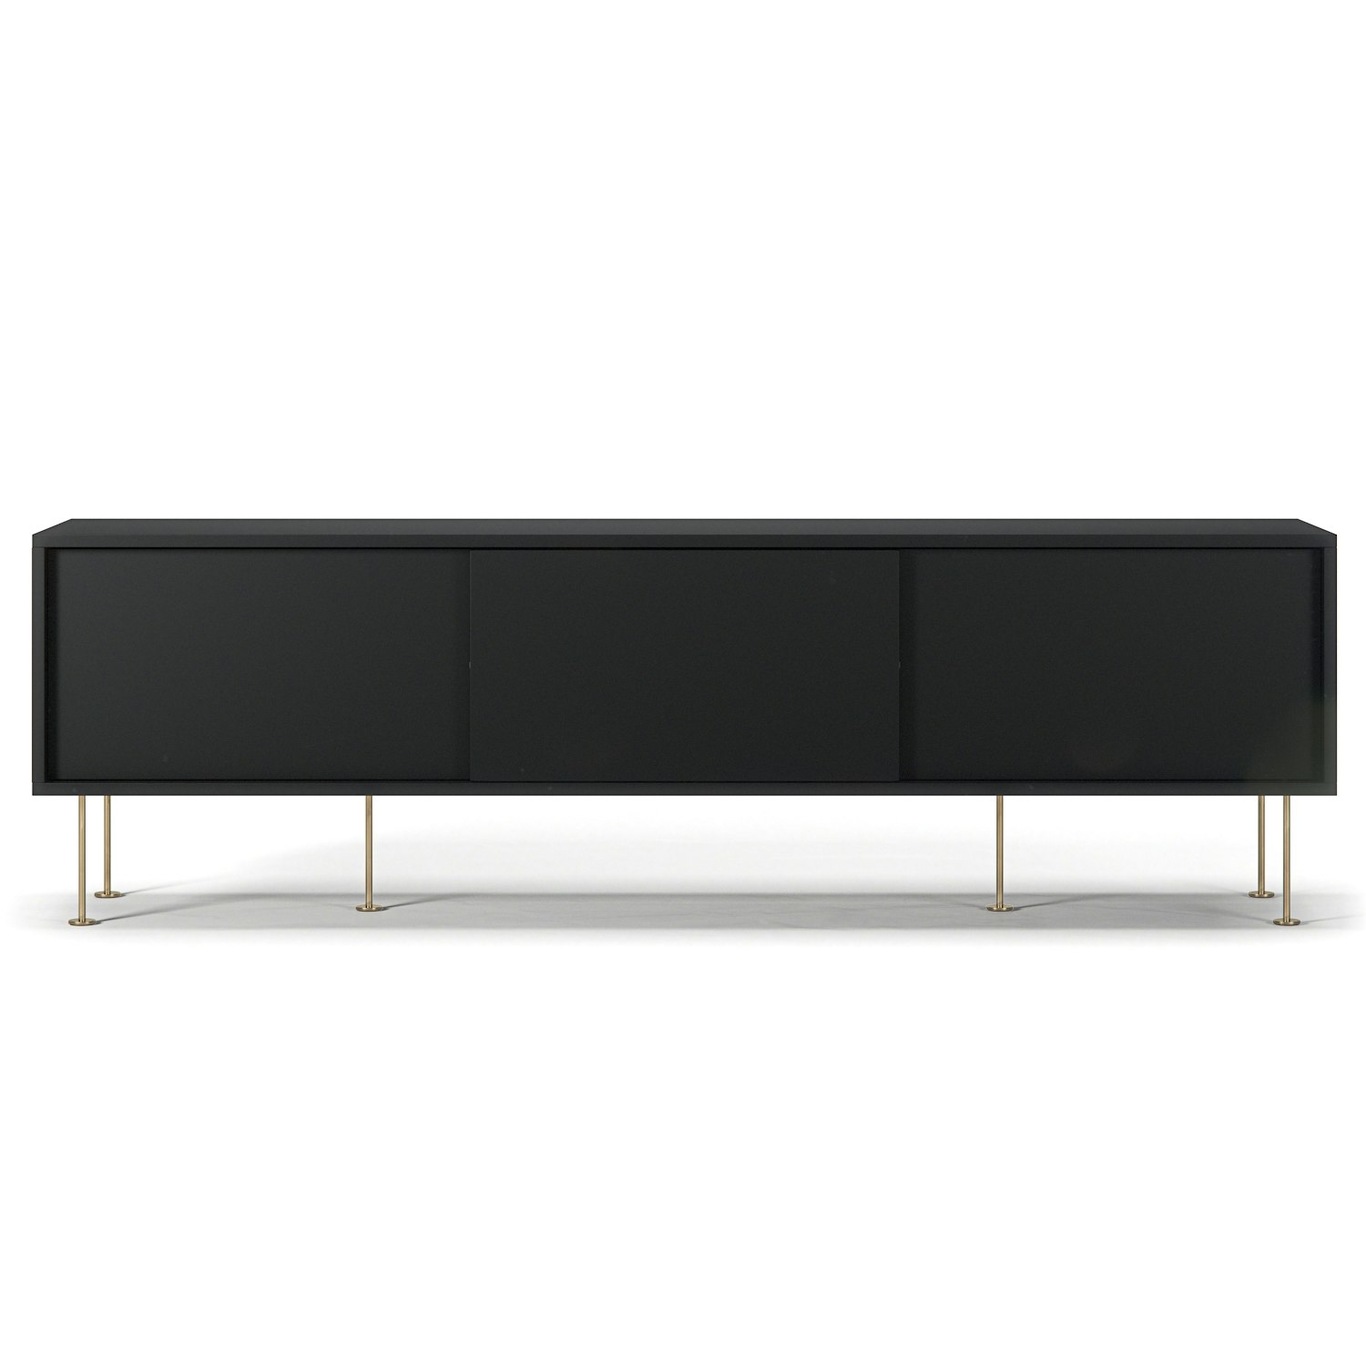 Vogue Media Bench With Legs 180 cm, Anthracite / Brass